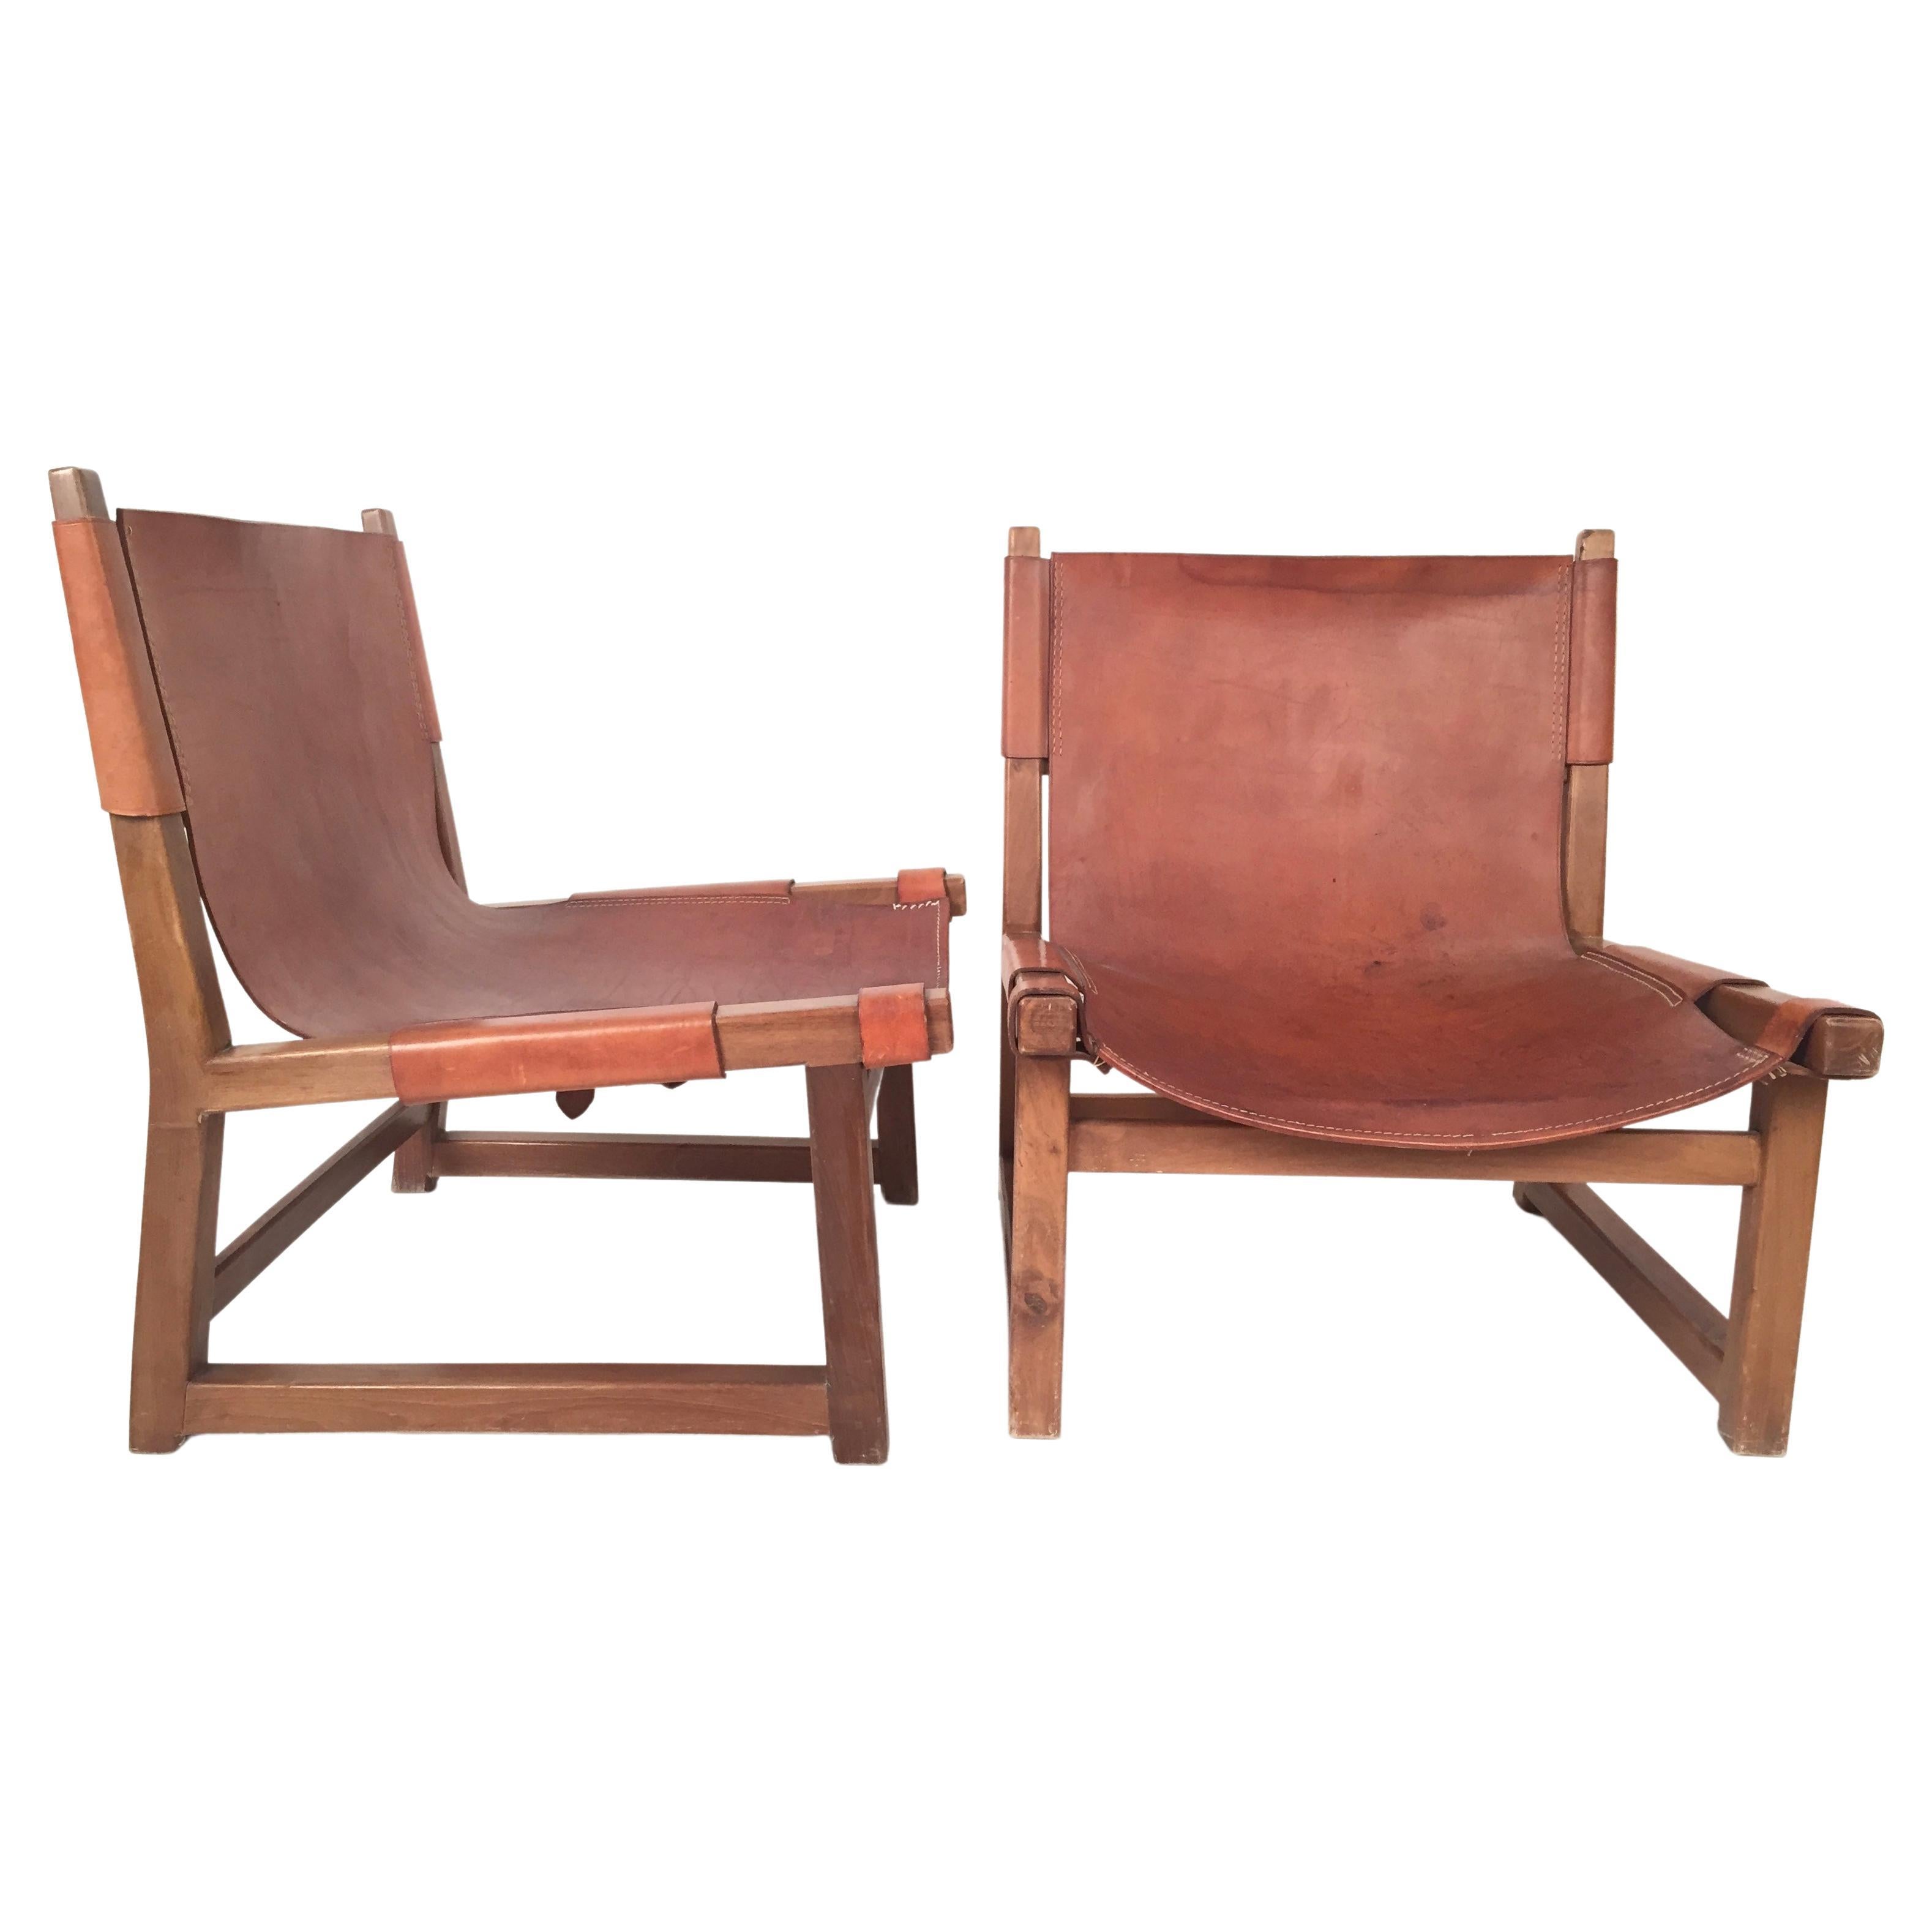 Mid-Century Modern Paco Muñoz Hunting Chairs, Walnut and Leather